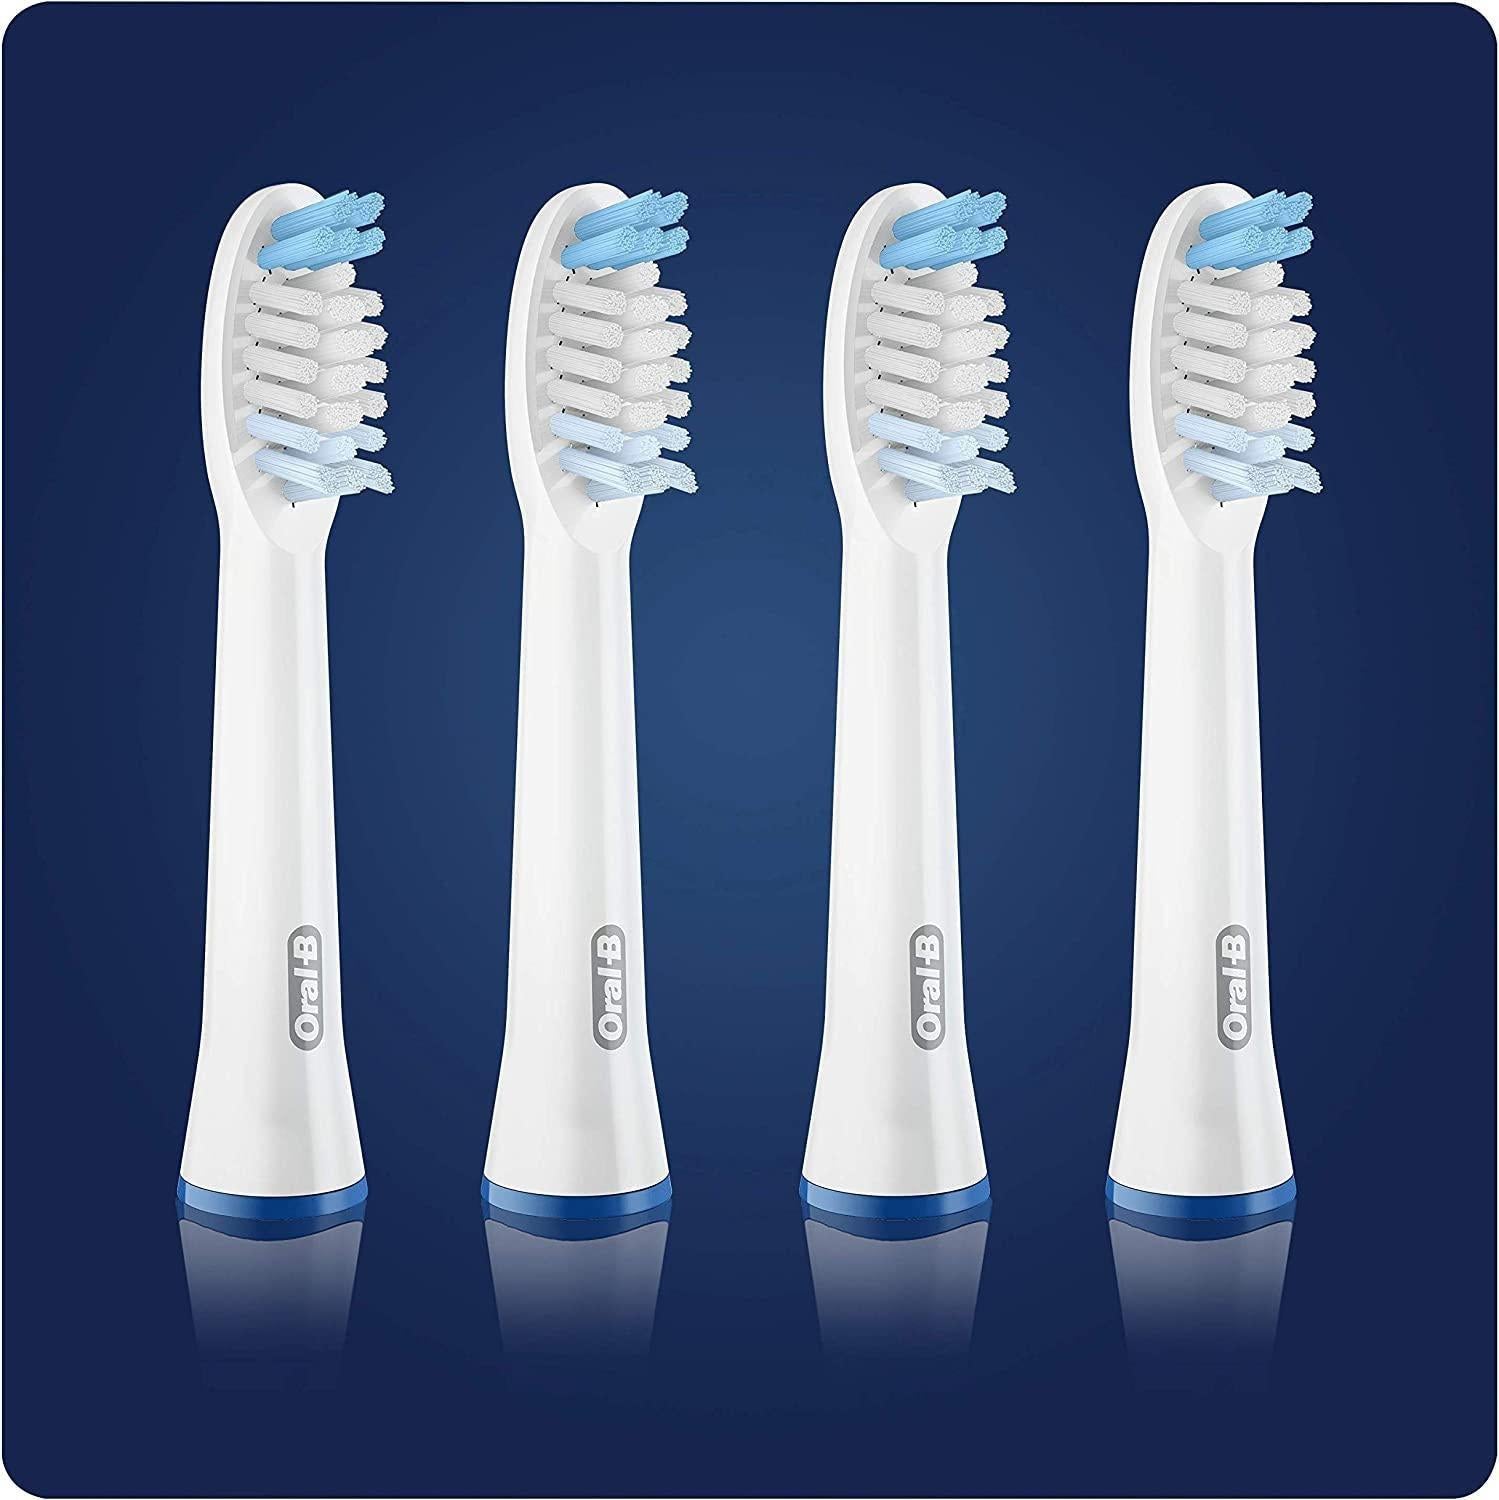 Braun Oral-B Pulsonic Clean Toothbrush Heads for Sonic Toothbrushes- Gentle Cleaning, 4 Pack - Healthxpress.ie